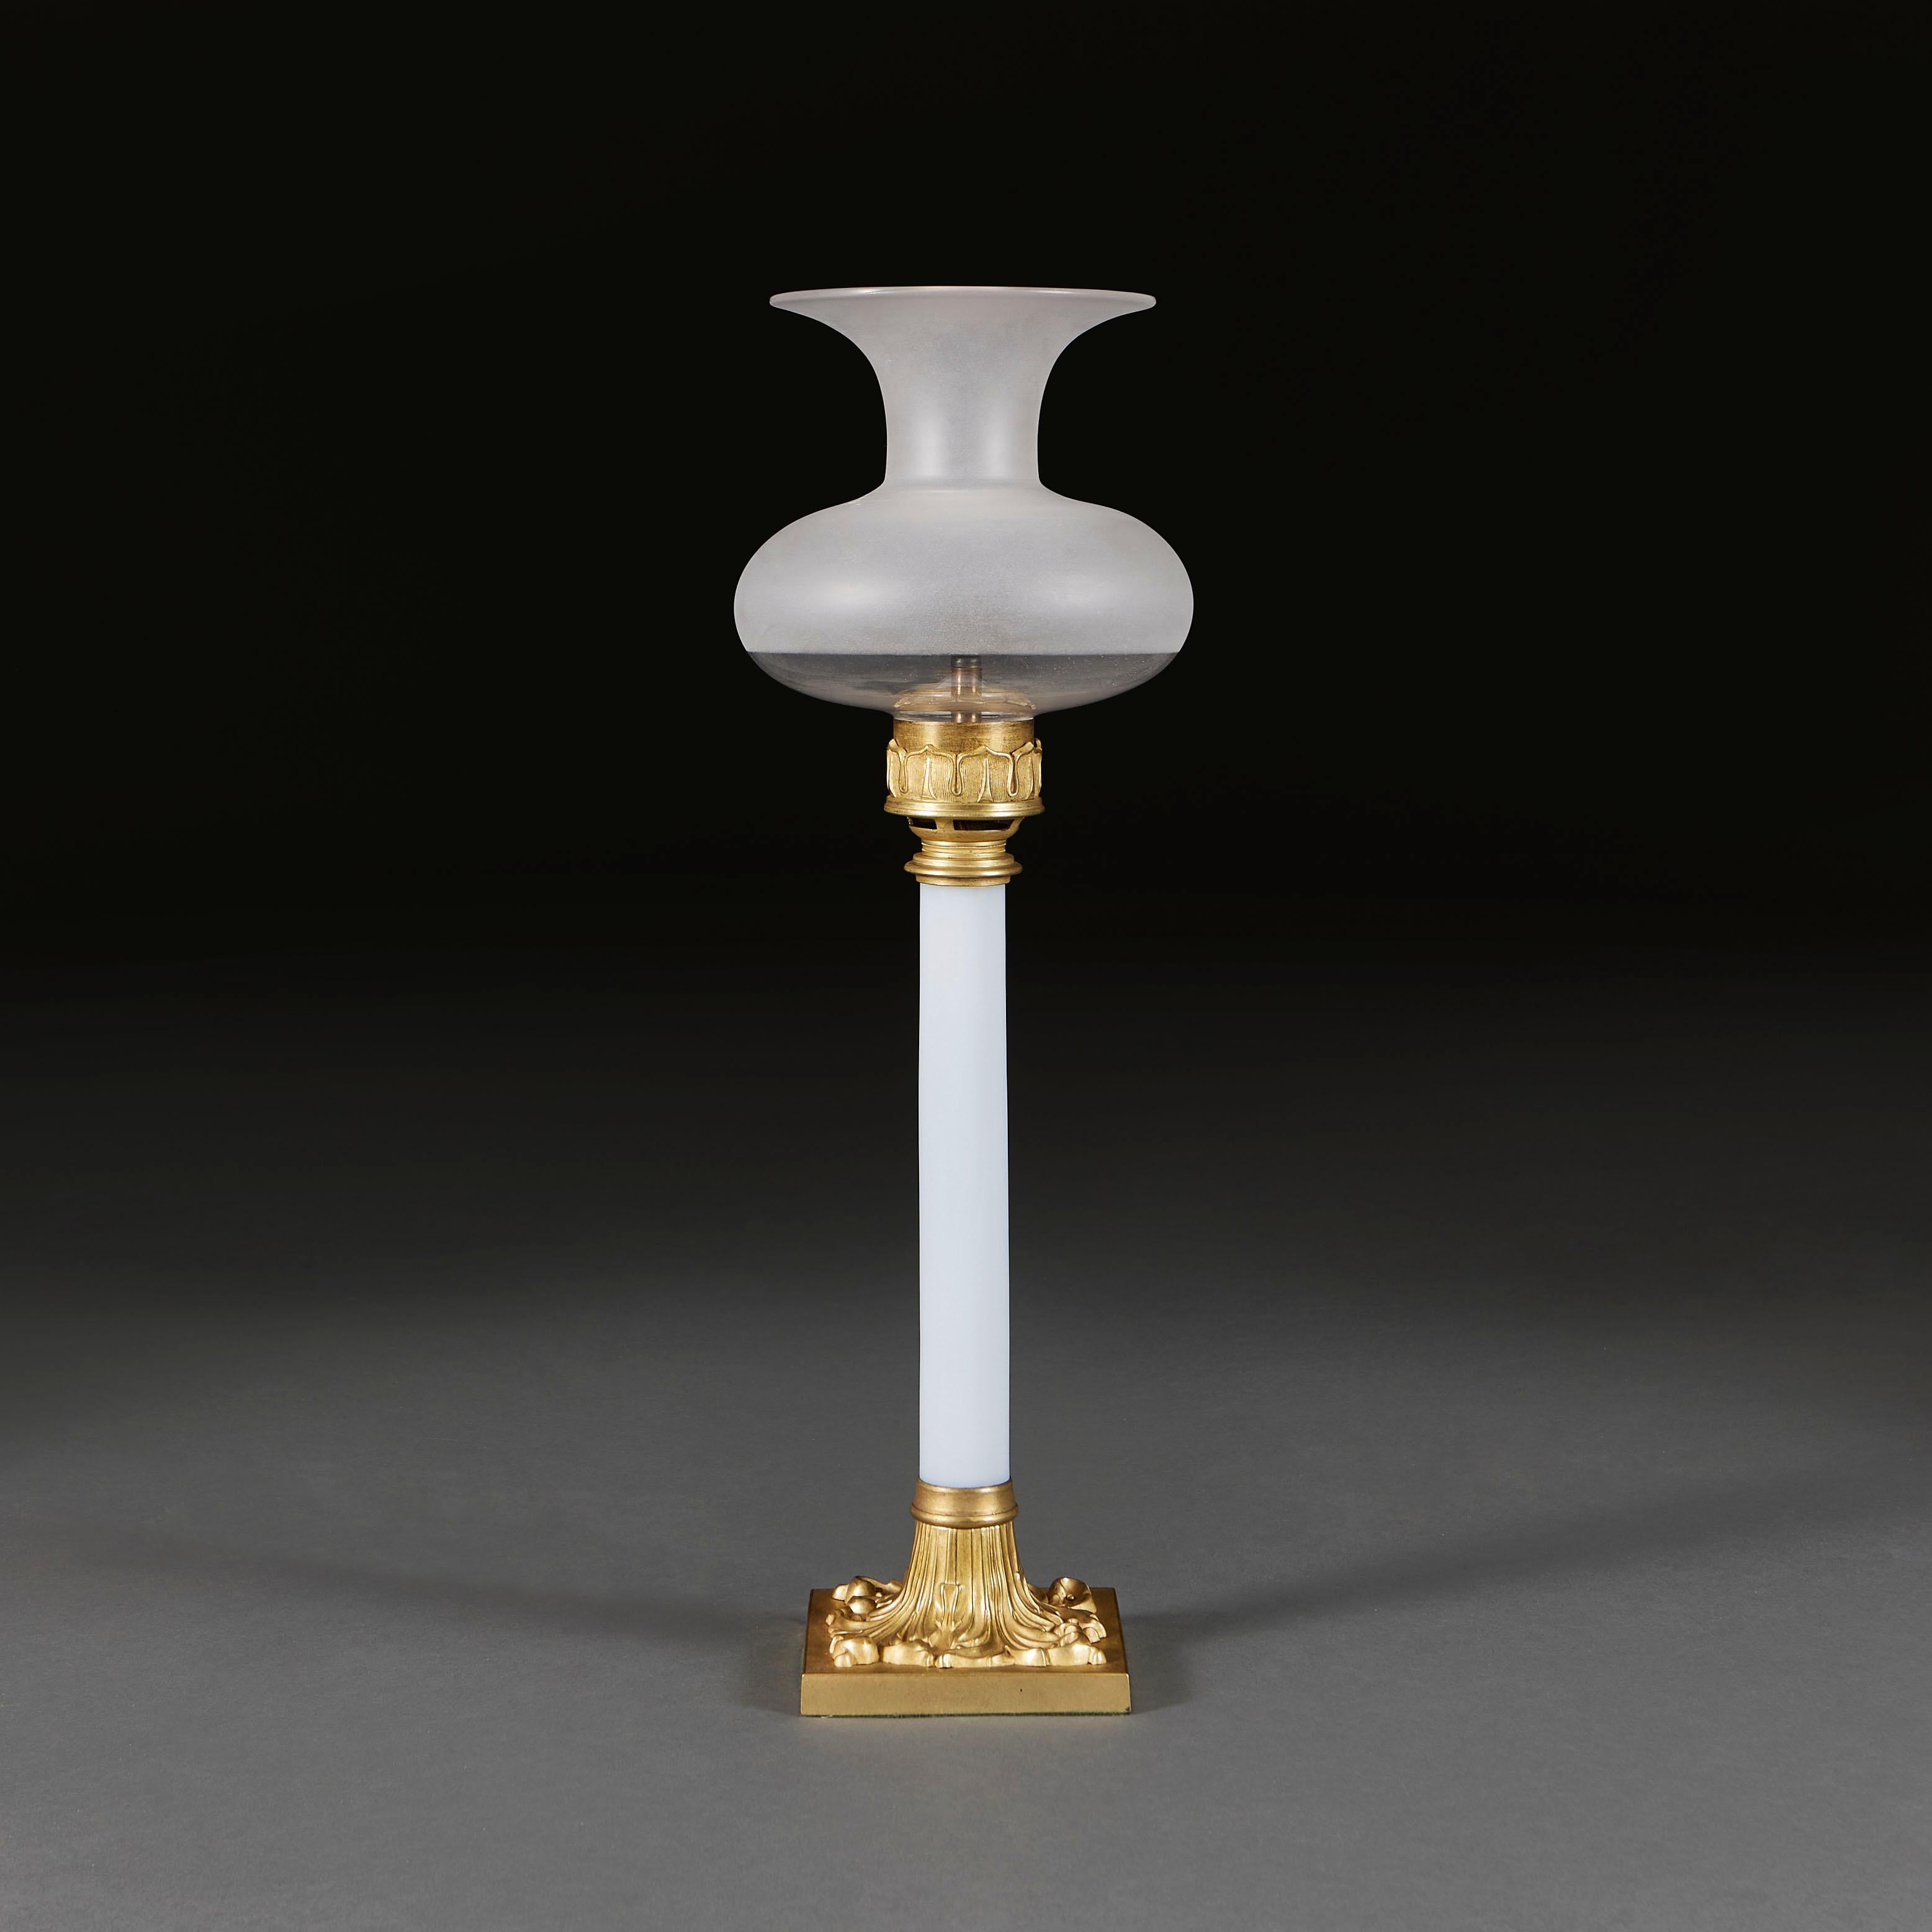 England, circa 1840

An unusual mid nineteenth century white opaline glass column lamp with gilt bronze mounts and unusual onion shaped cowl shade.

Total height 57.00cm

Width of base 13.00cm